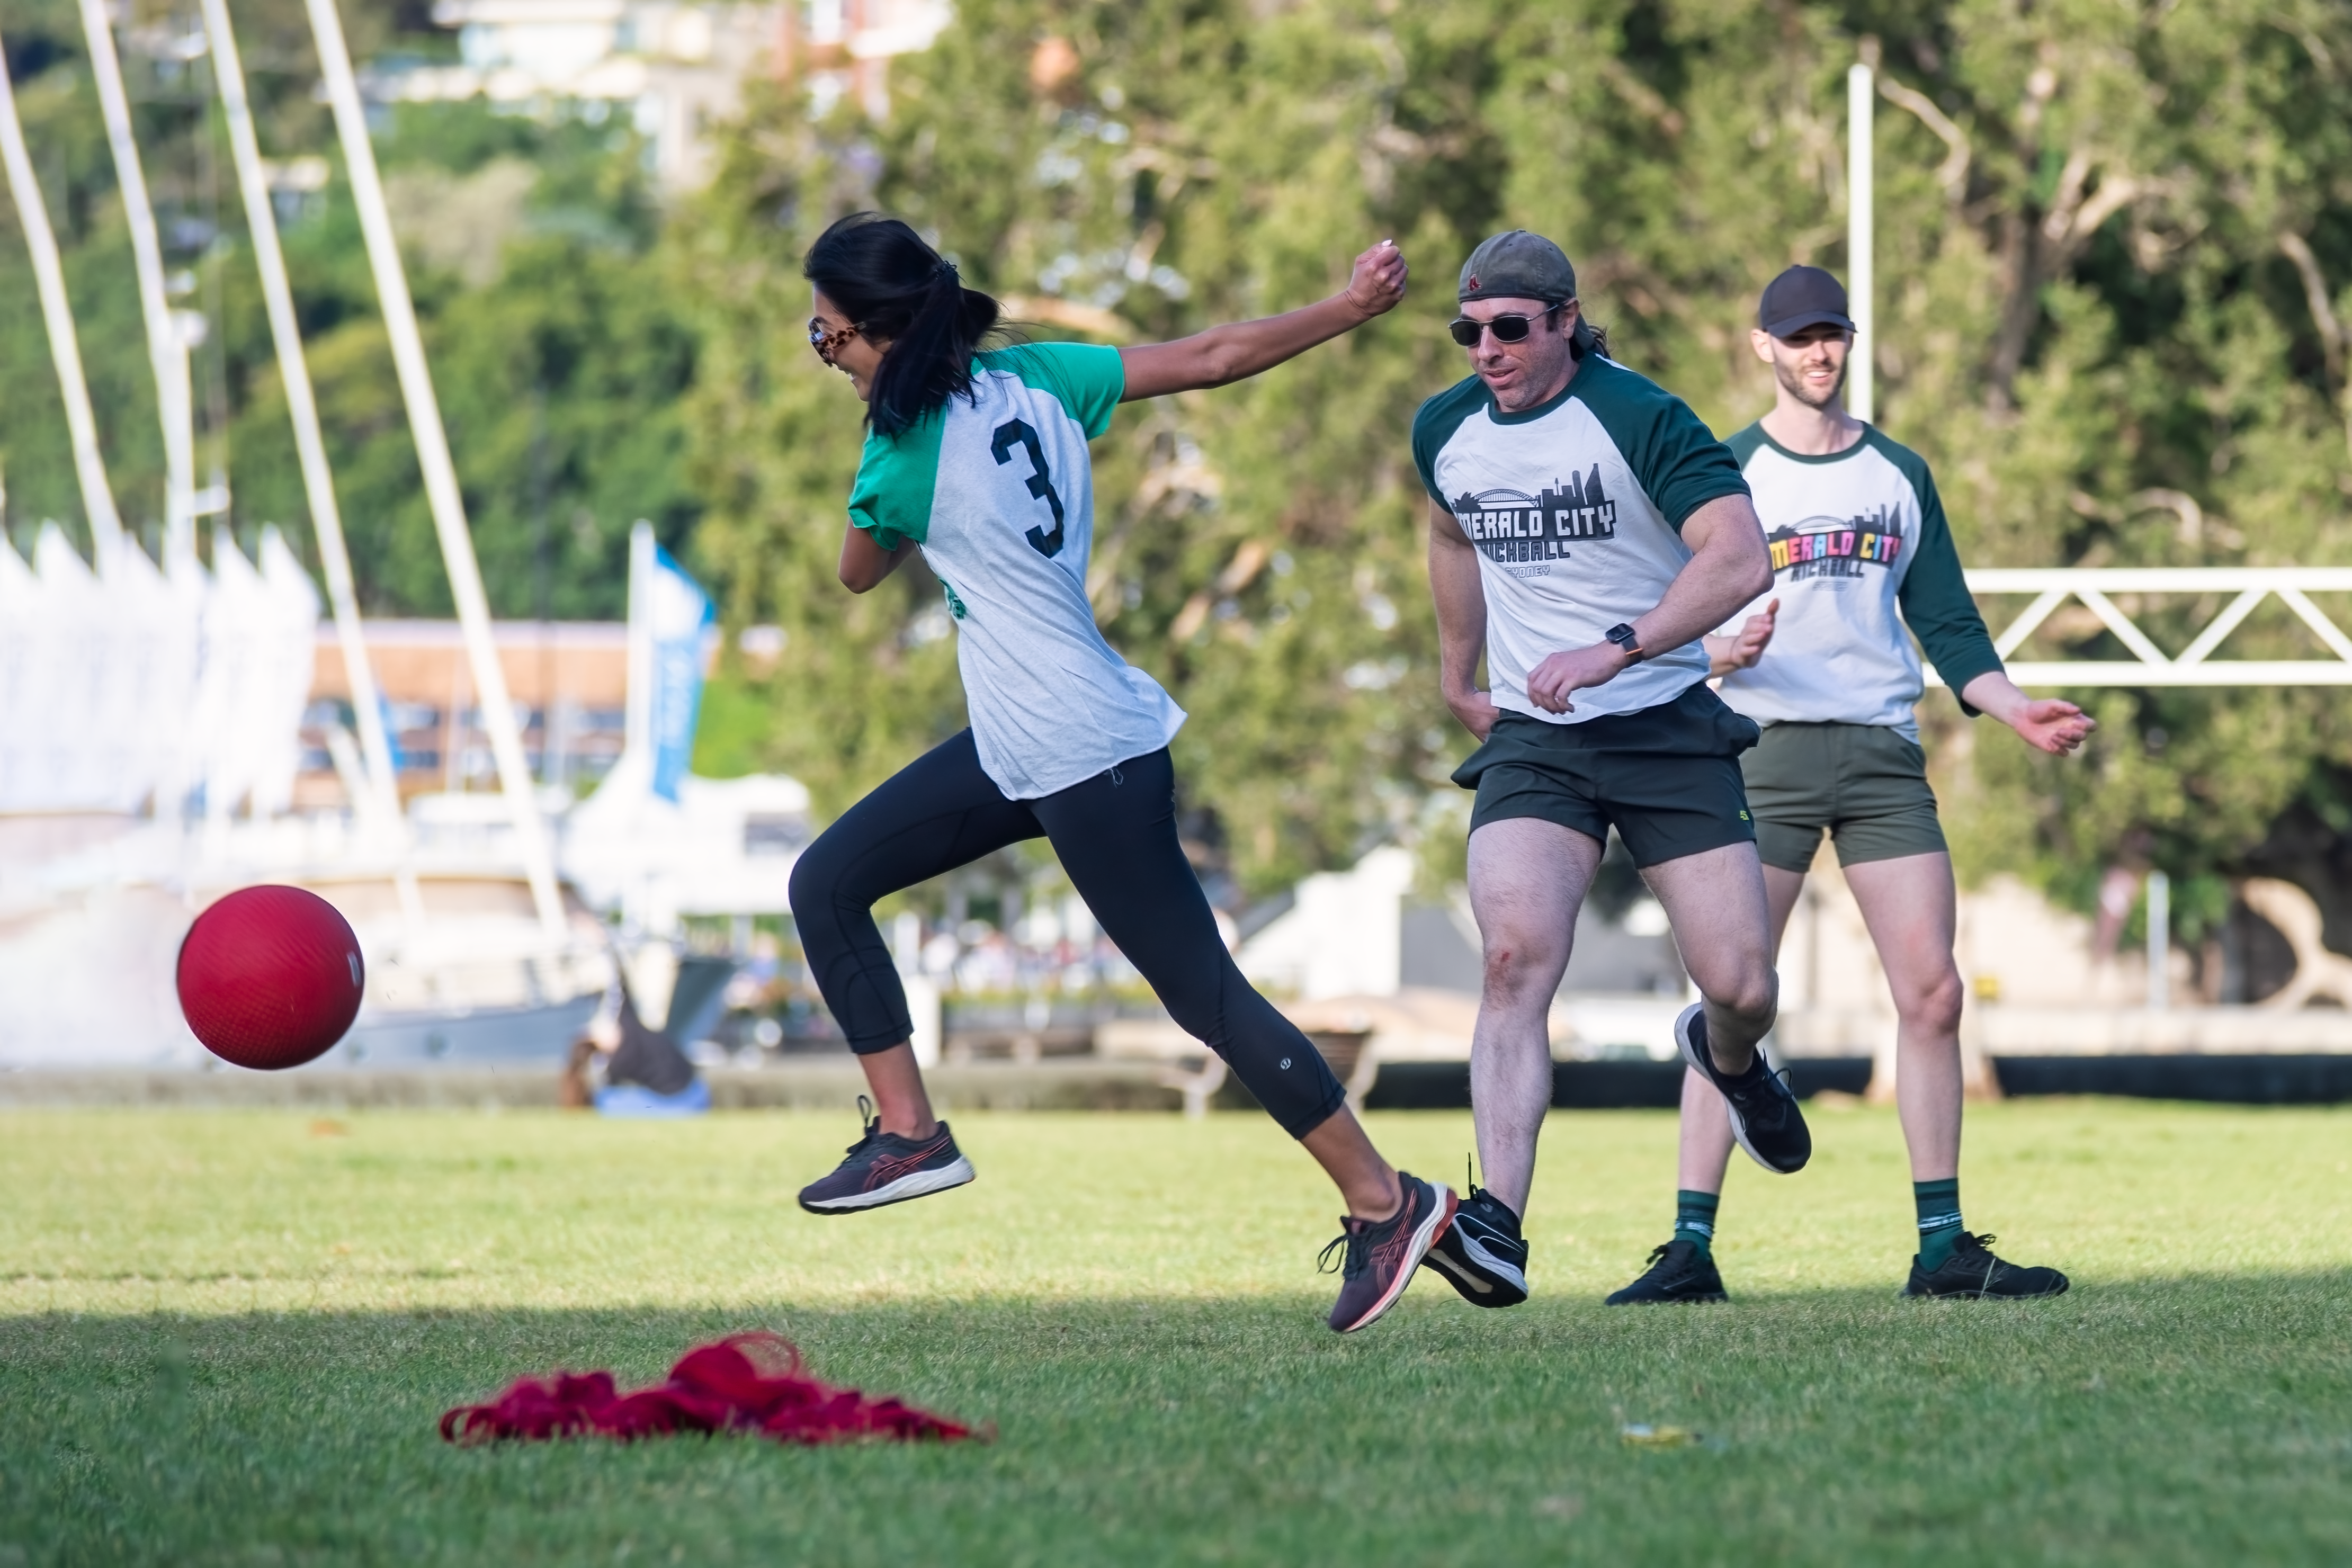 Emerald City Kickball comes to Canberra